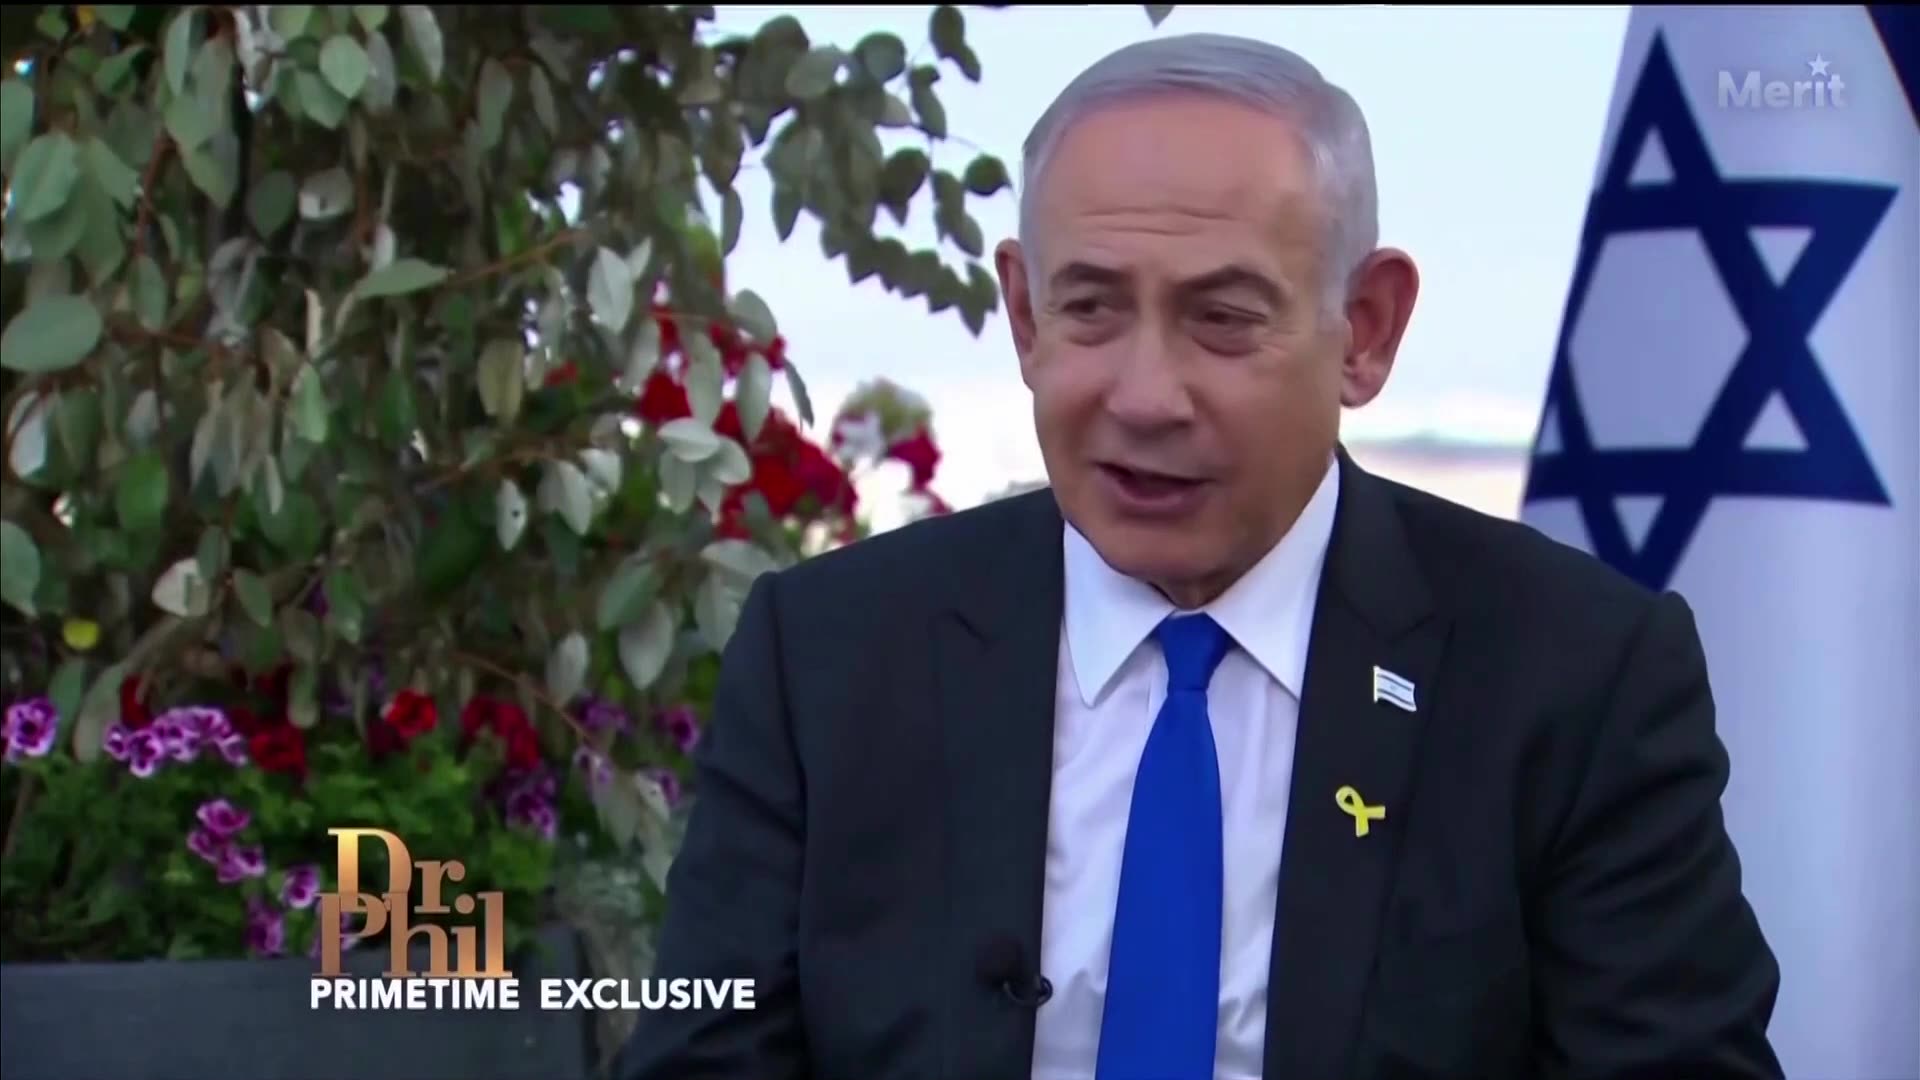 Netanyahu: I hope I can patch things up with Biden